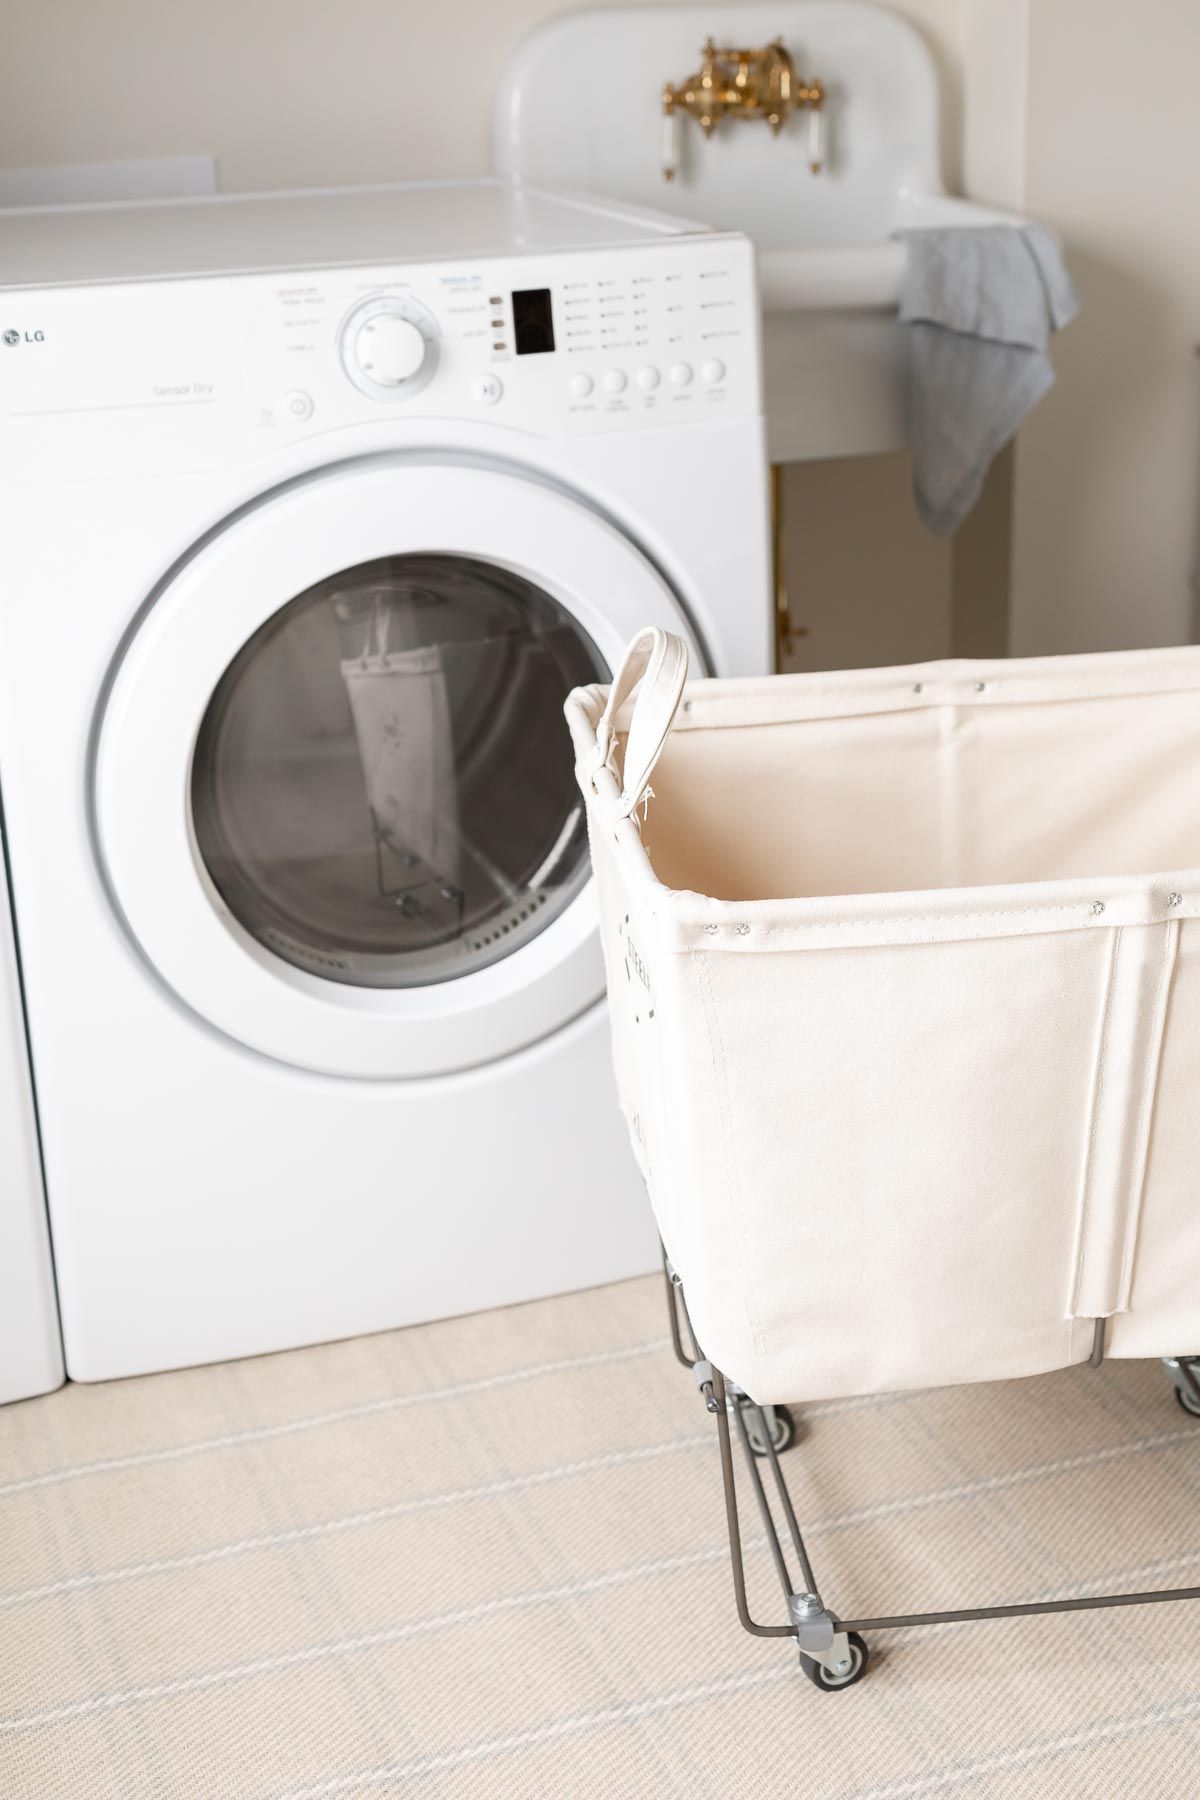 A laundry room with a white tumble dryer, a vintage laundry basket in front, placed on top of plaid rugs on the carpet